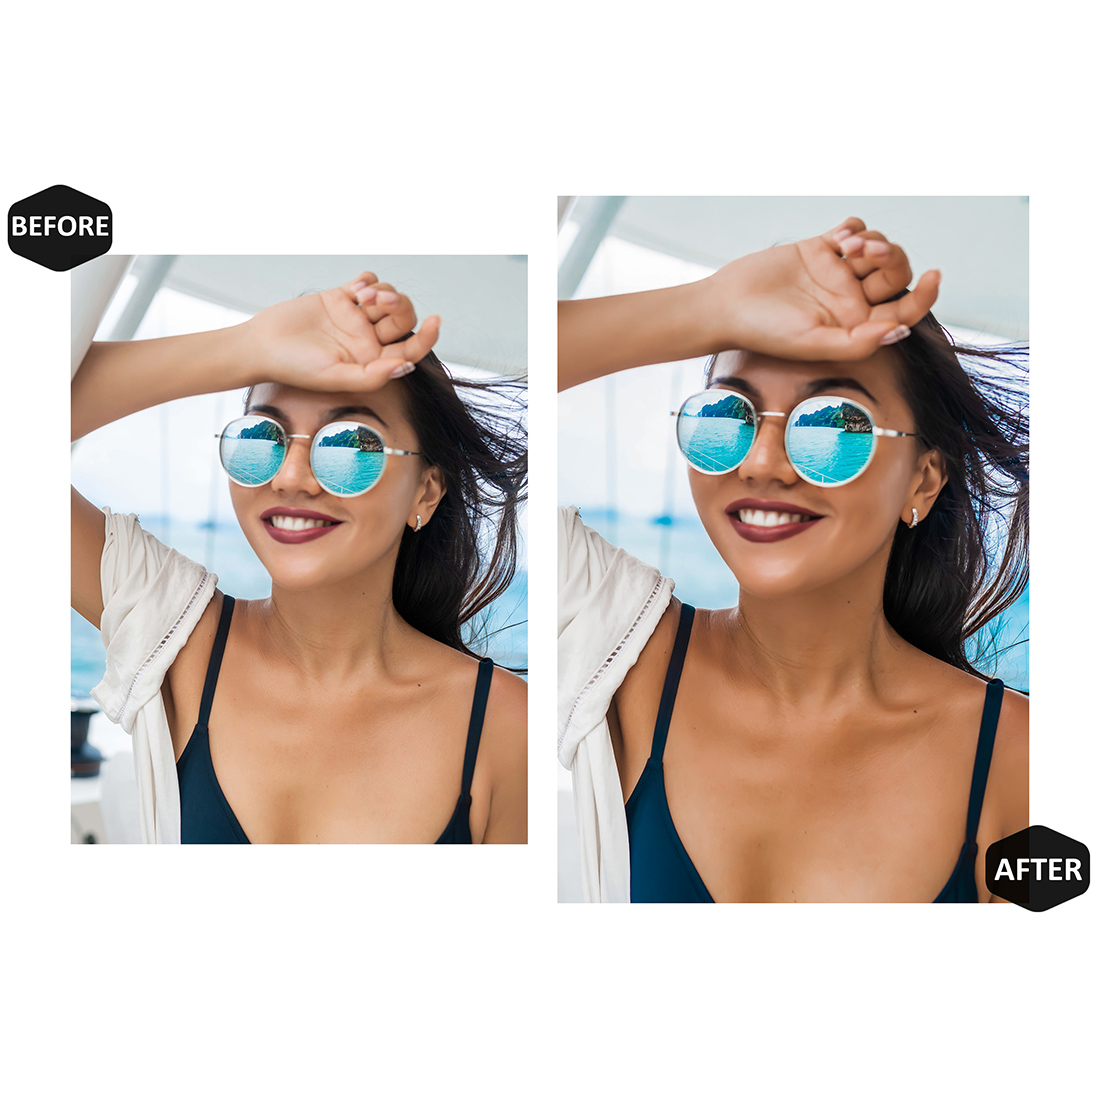 12 Photoshop Actions, Sea Breeze Ps Action, Summer ACR Preset, Bright Ps Filter, Portrait And Lifestyle Theme For Instagram, Blogger preview image.